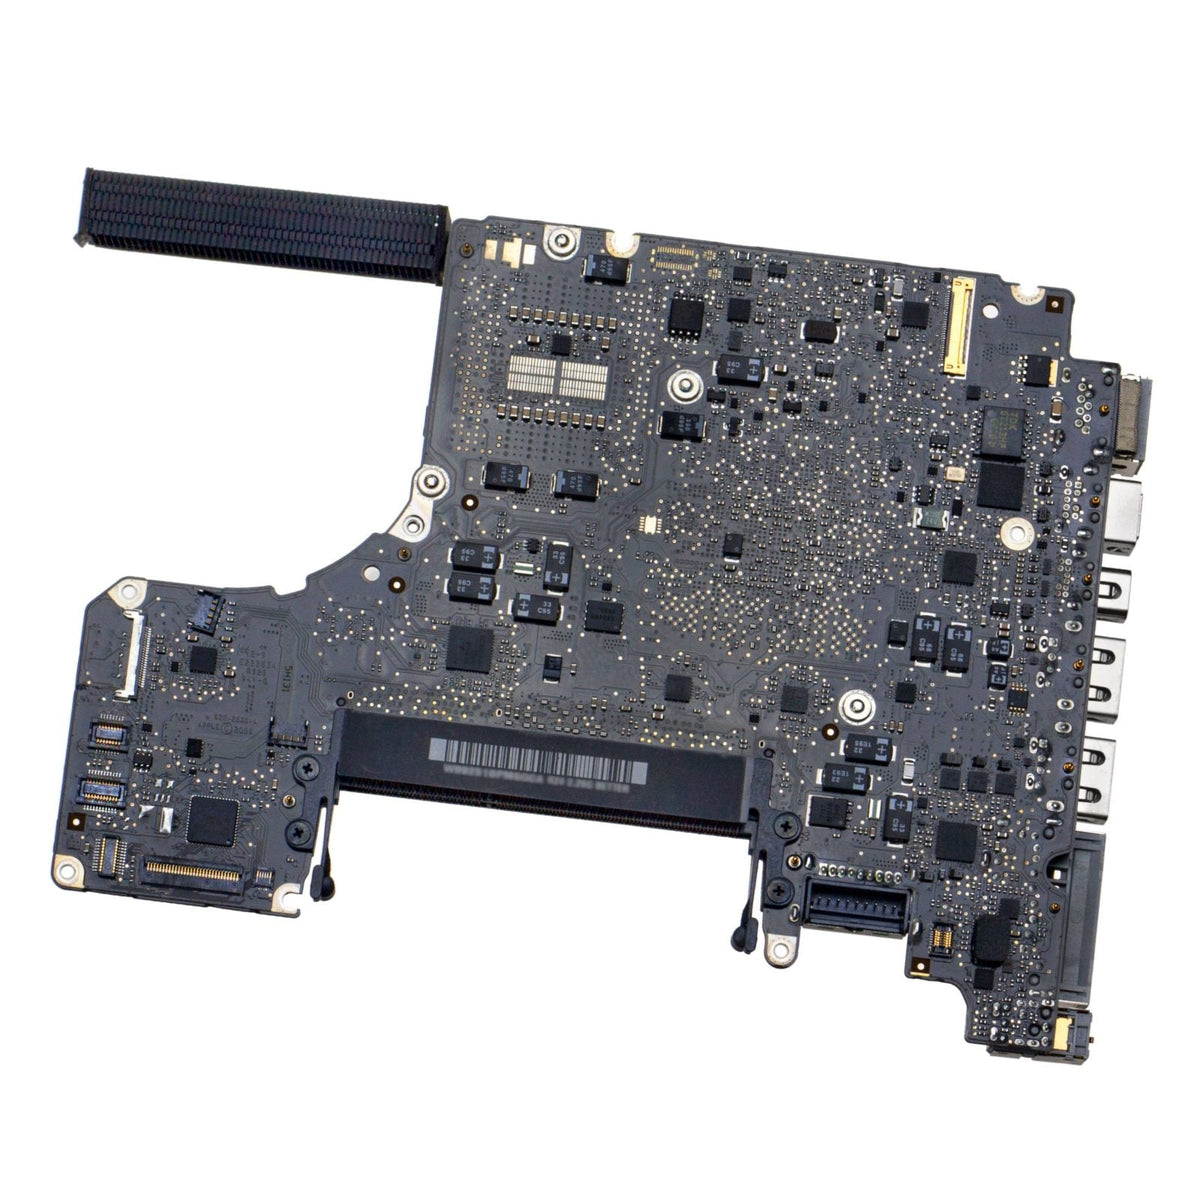 MOTHERBOARD FOR MACBOOK PRO 13" A1278 (MID 2010)